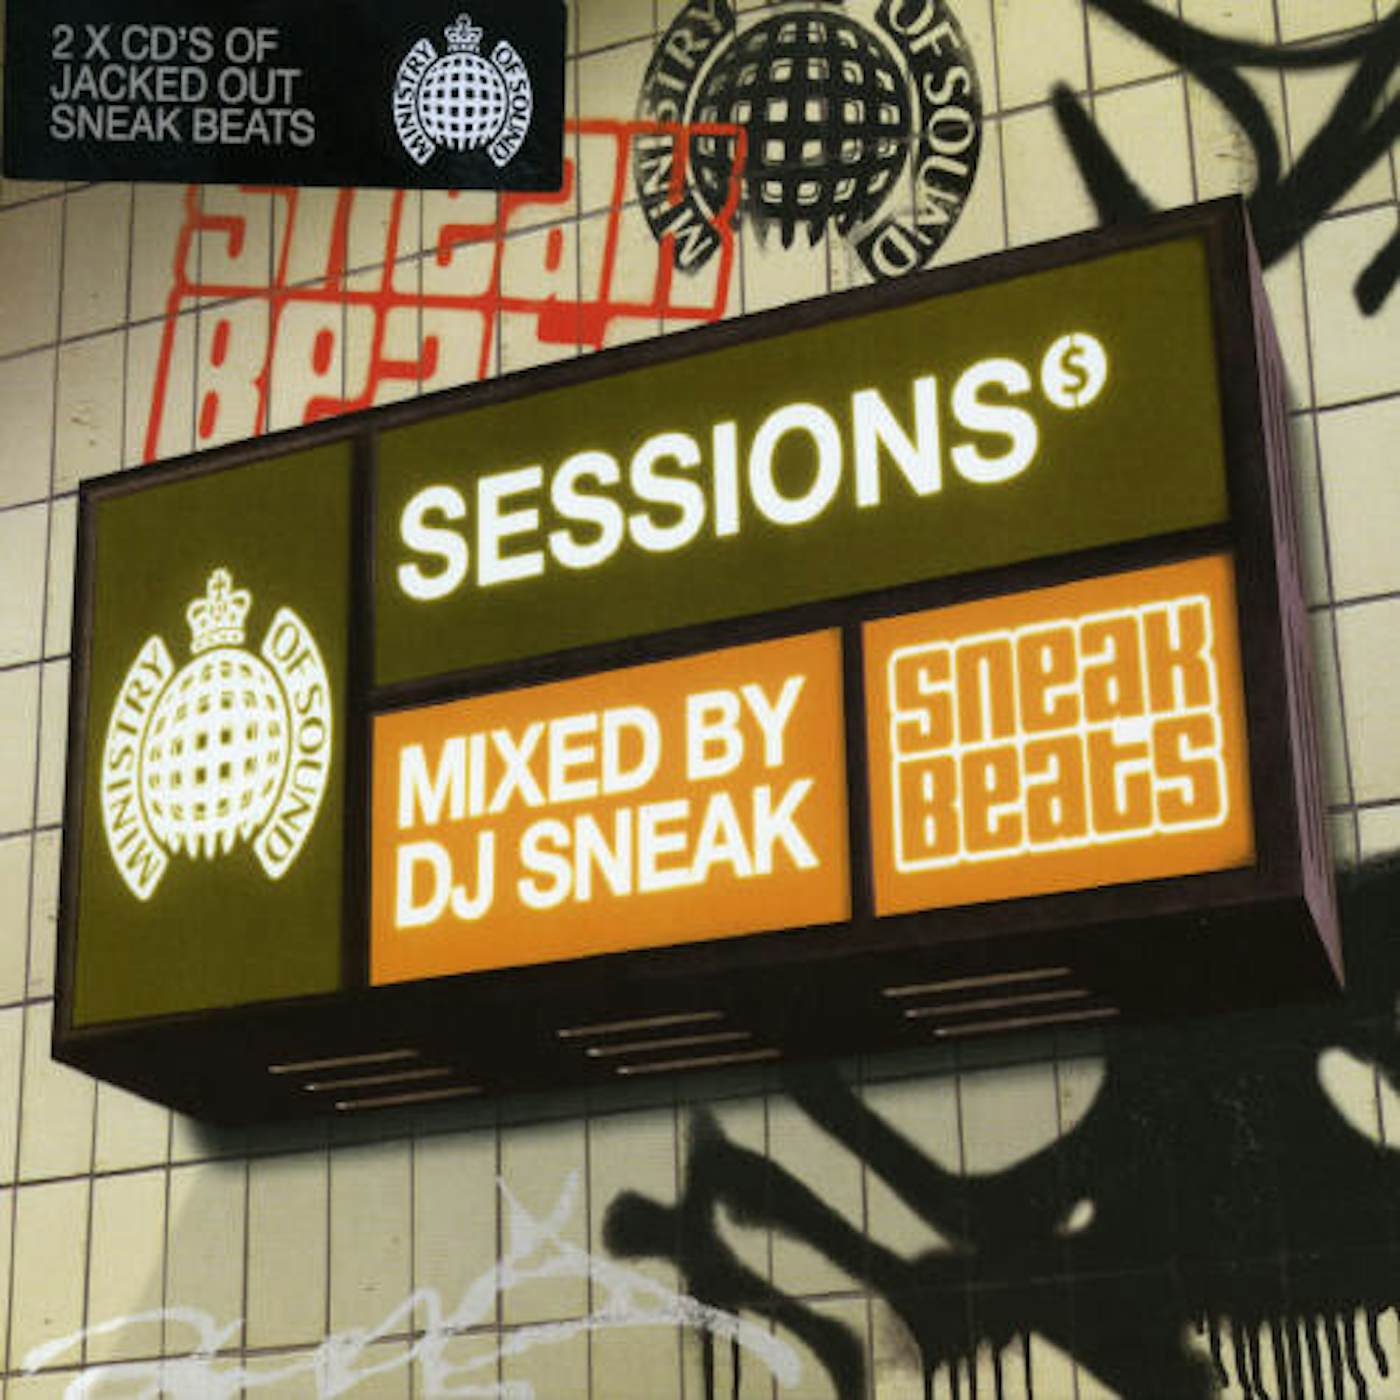 SESSIONS MIXED BY DJ SNEAK CD